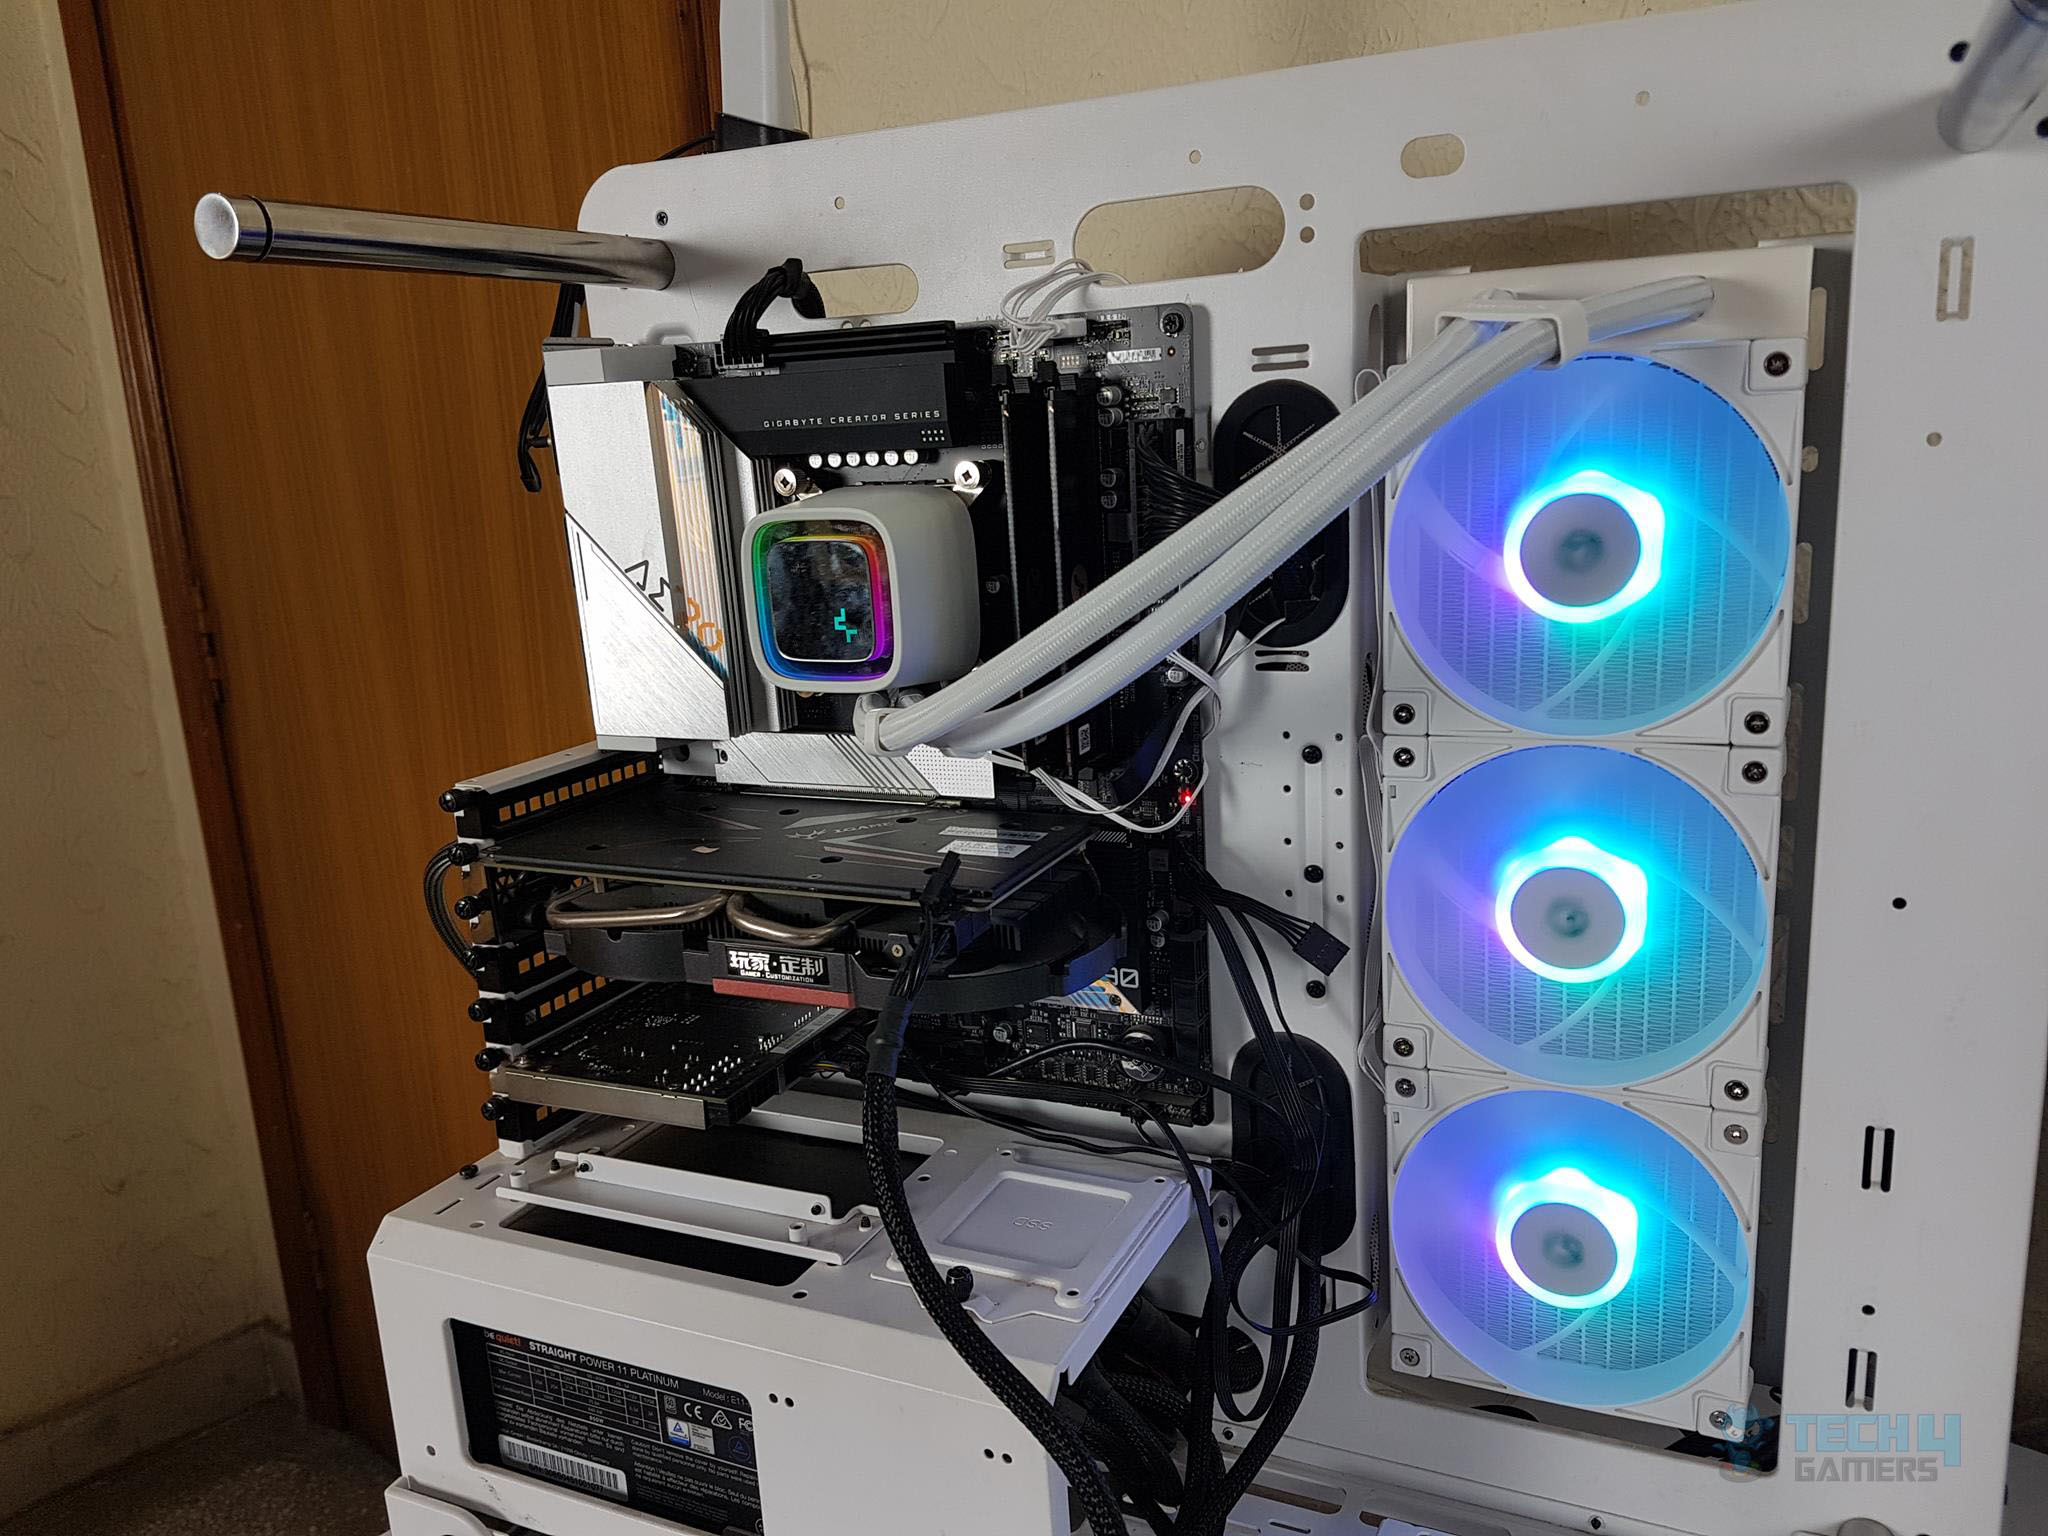 DeepCool LS720 White AIO Cooler Review: Worth It?